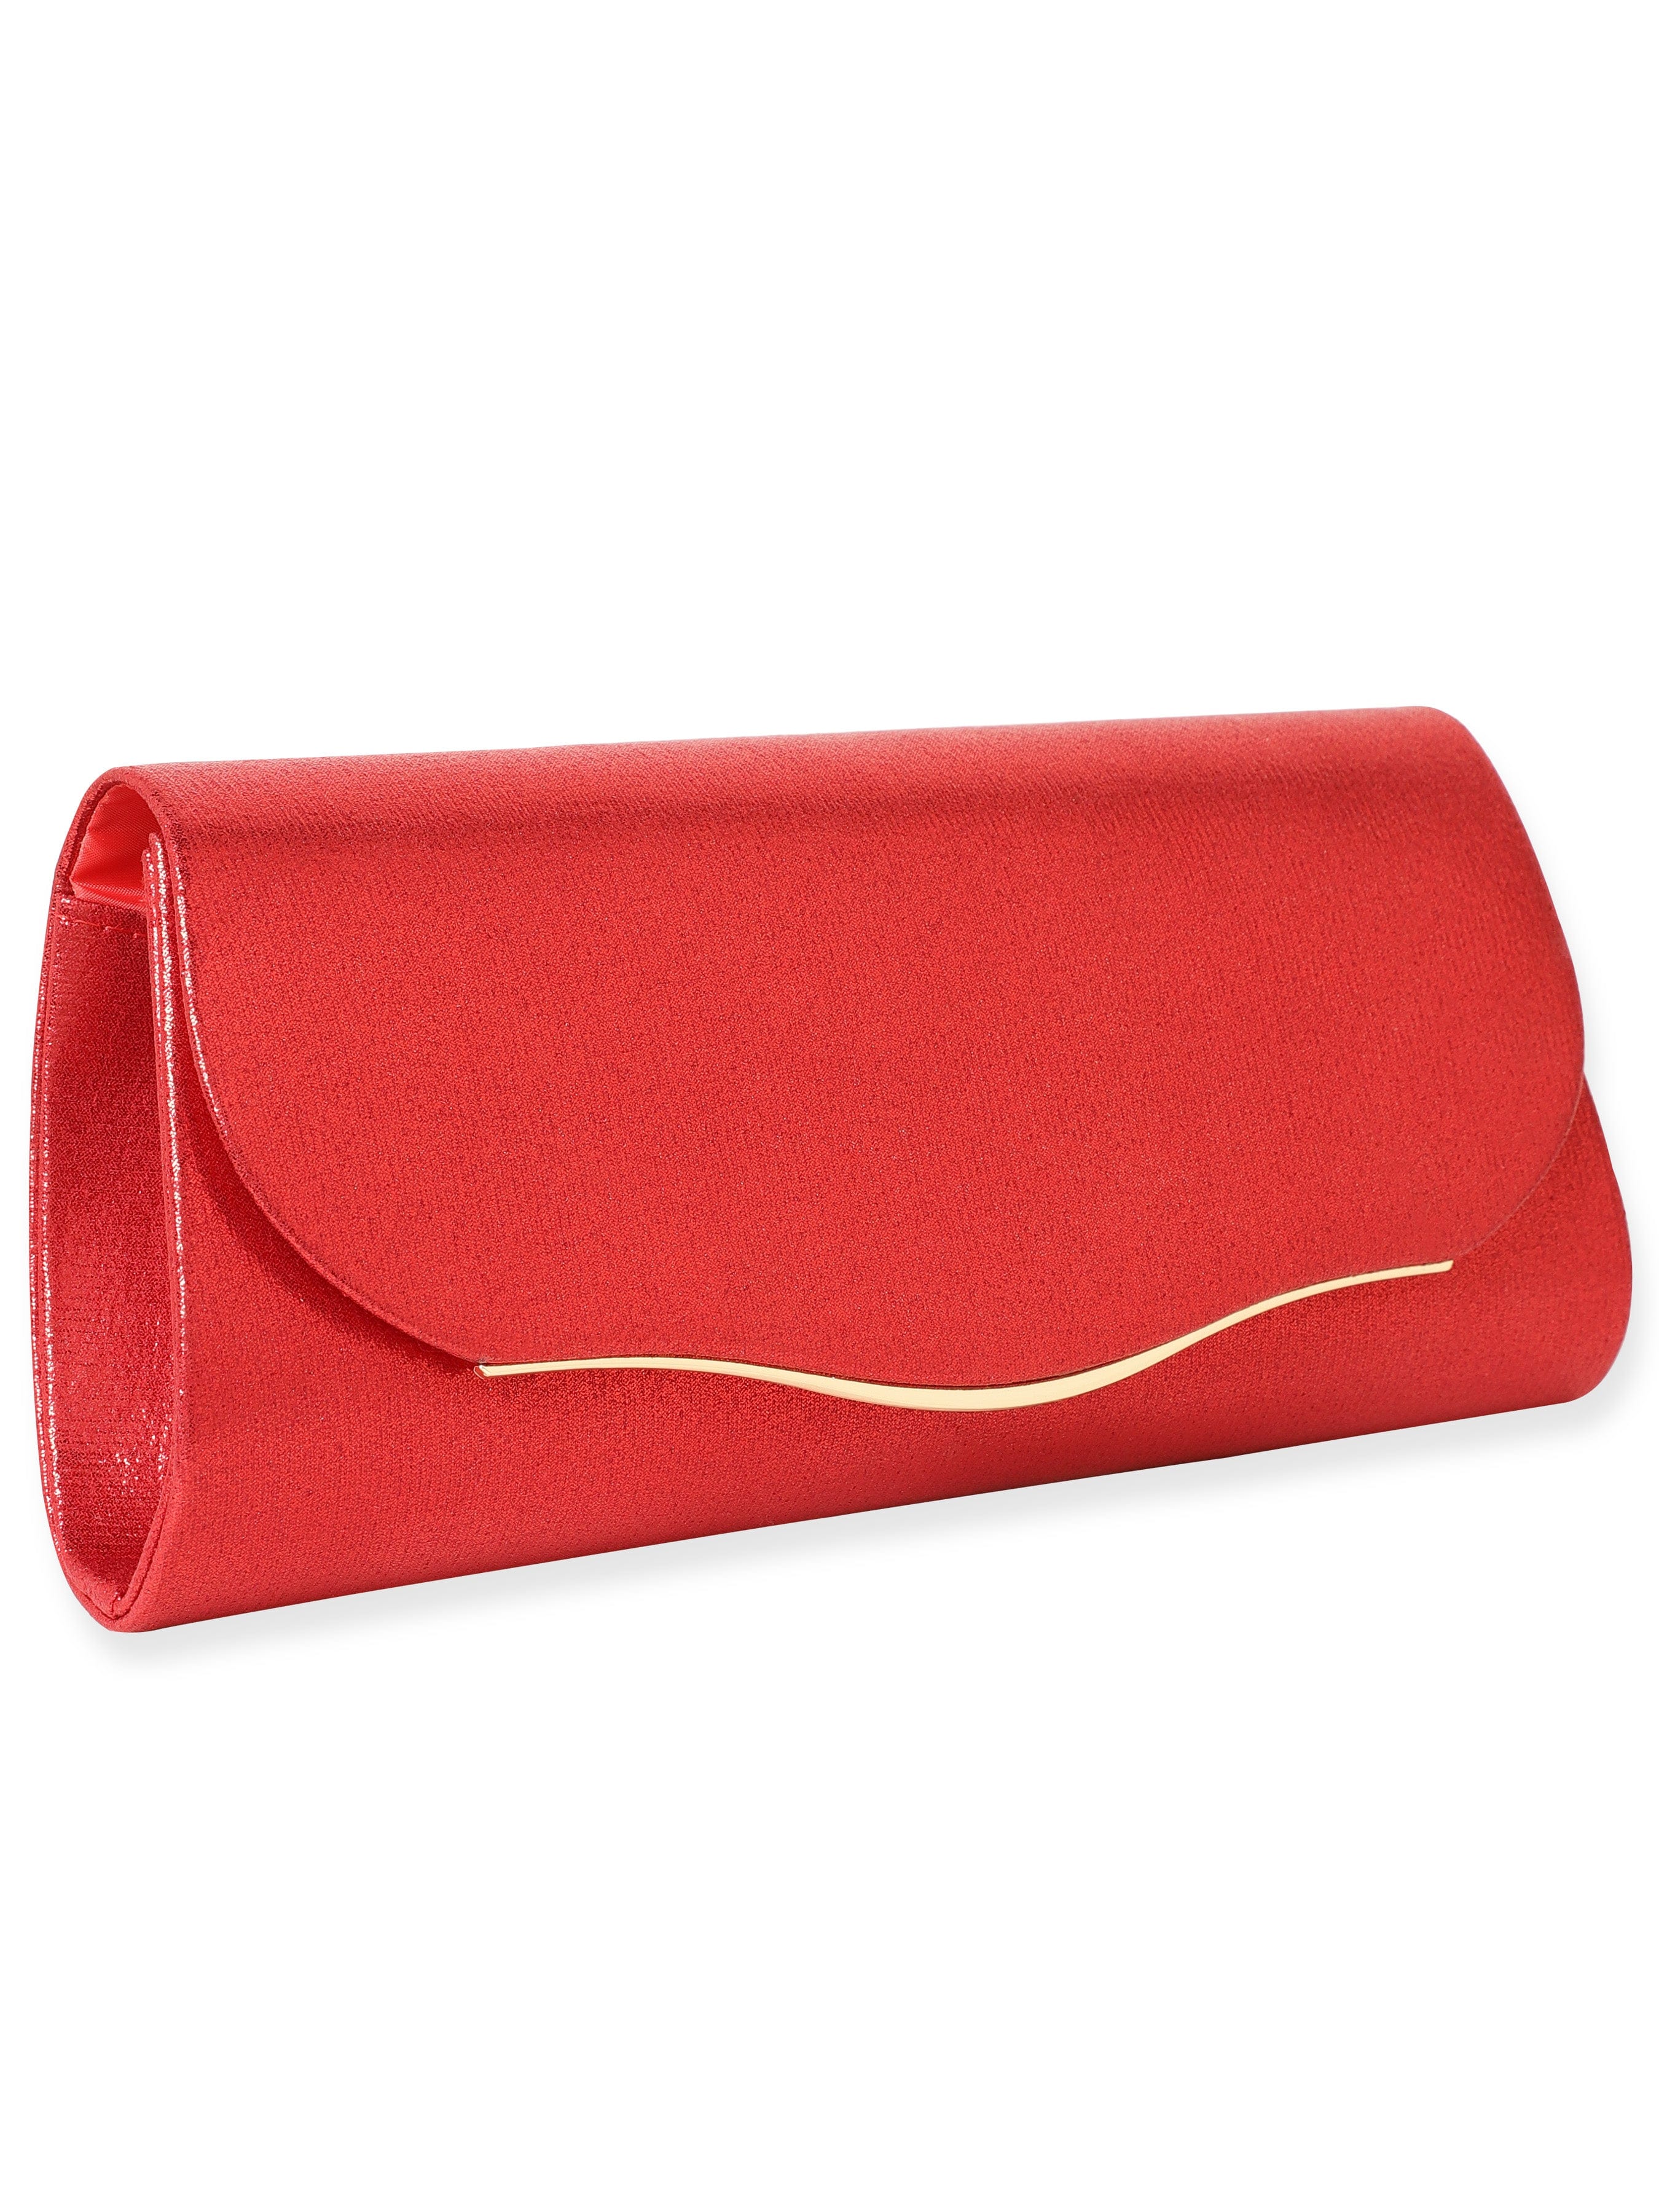 Heart Home CTHH16237 Handcrafted Embroidered Clutch Bag Purse Handbag for  Bridal, Casual, Party, Wedding (Red) : Amazon.in: Fashion